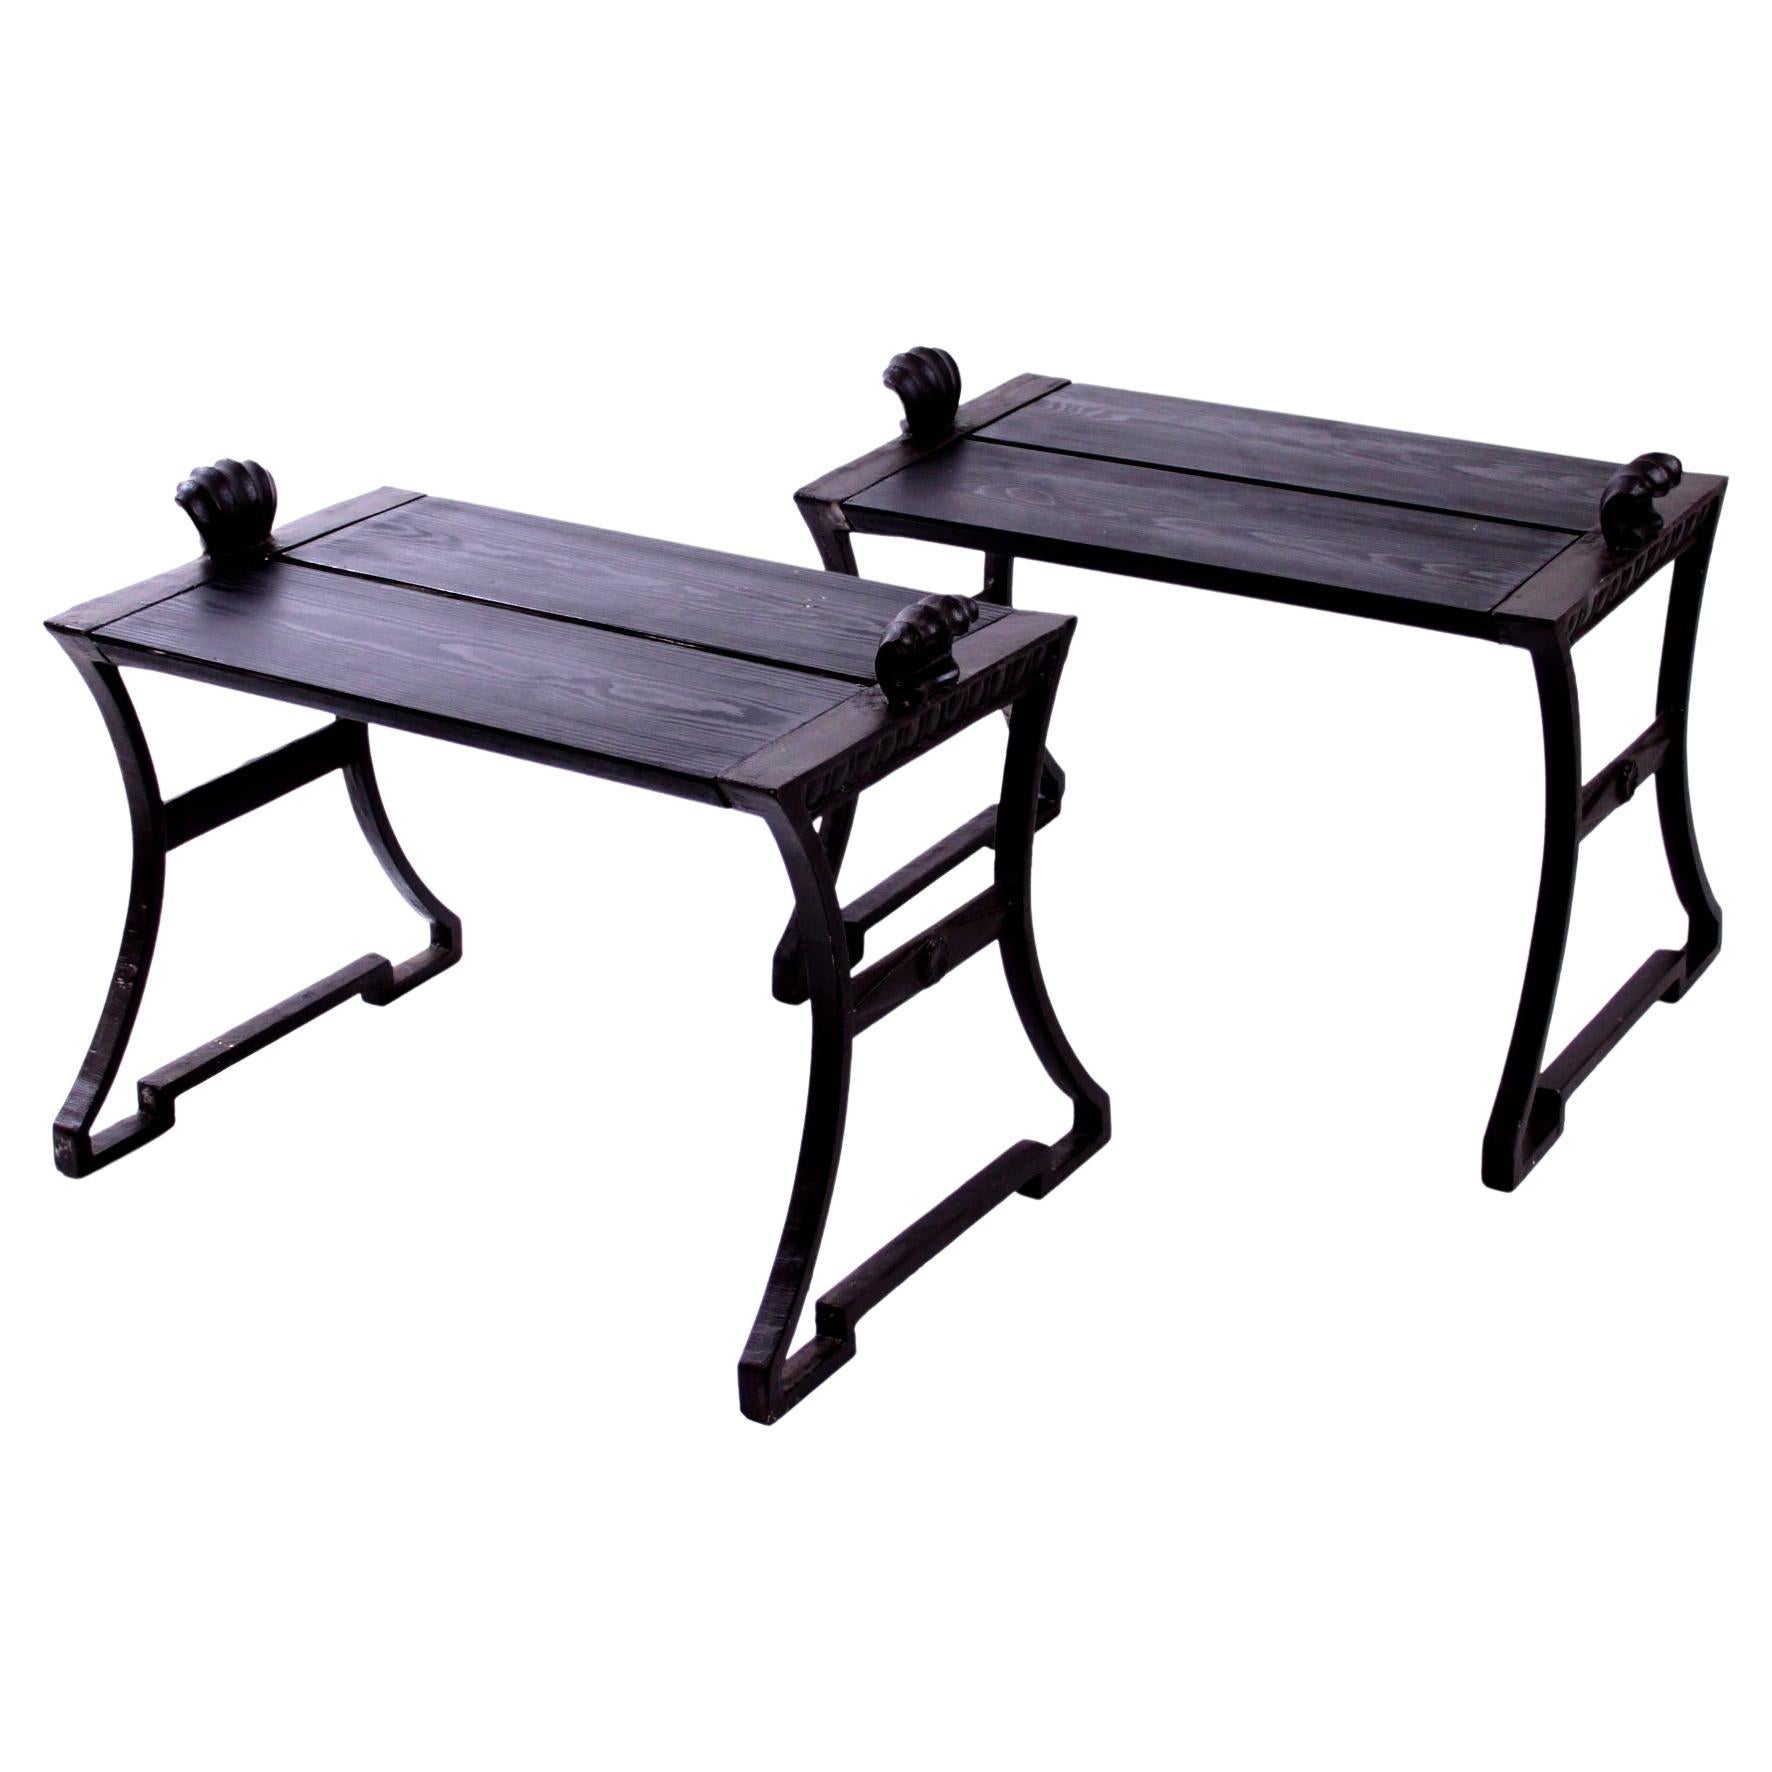 Pair of Folke Bensow Benches, Dessin Park Bench No. 1, Sweden